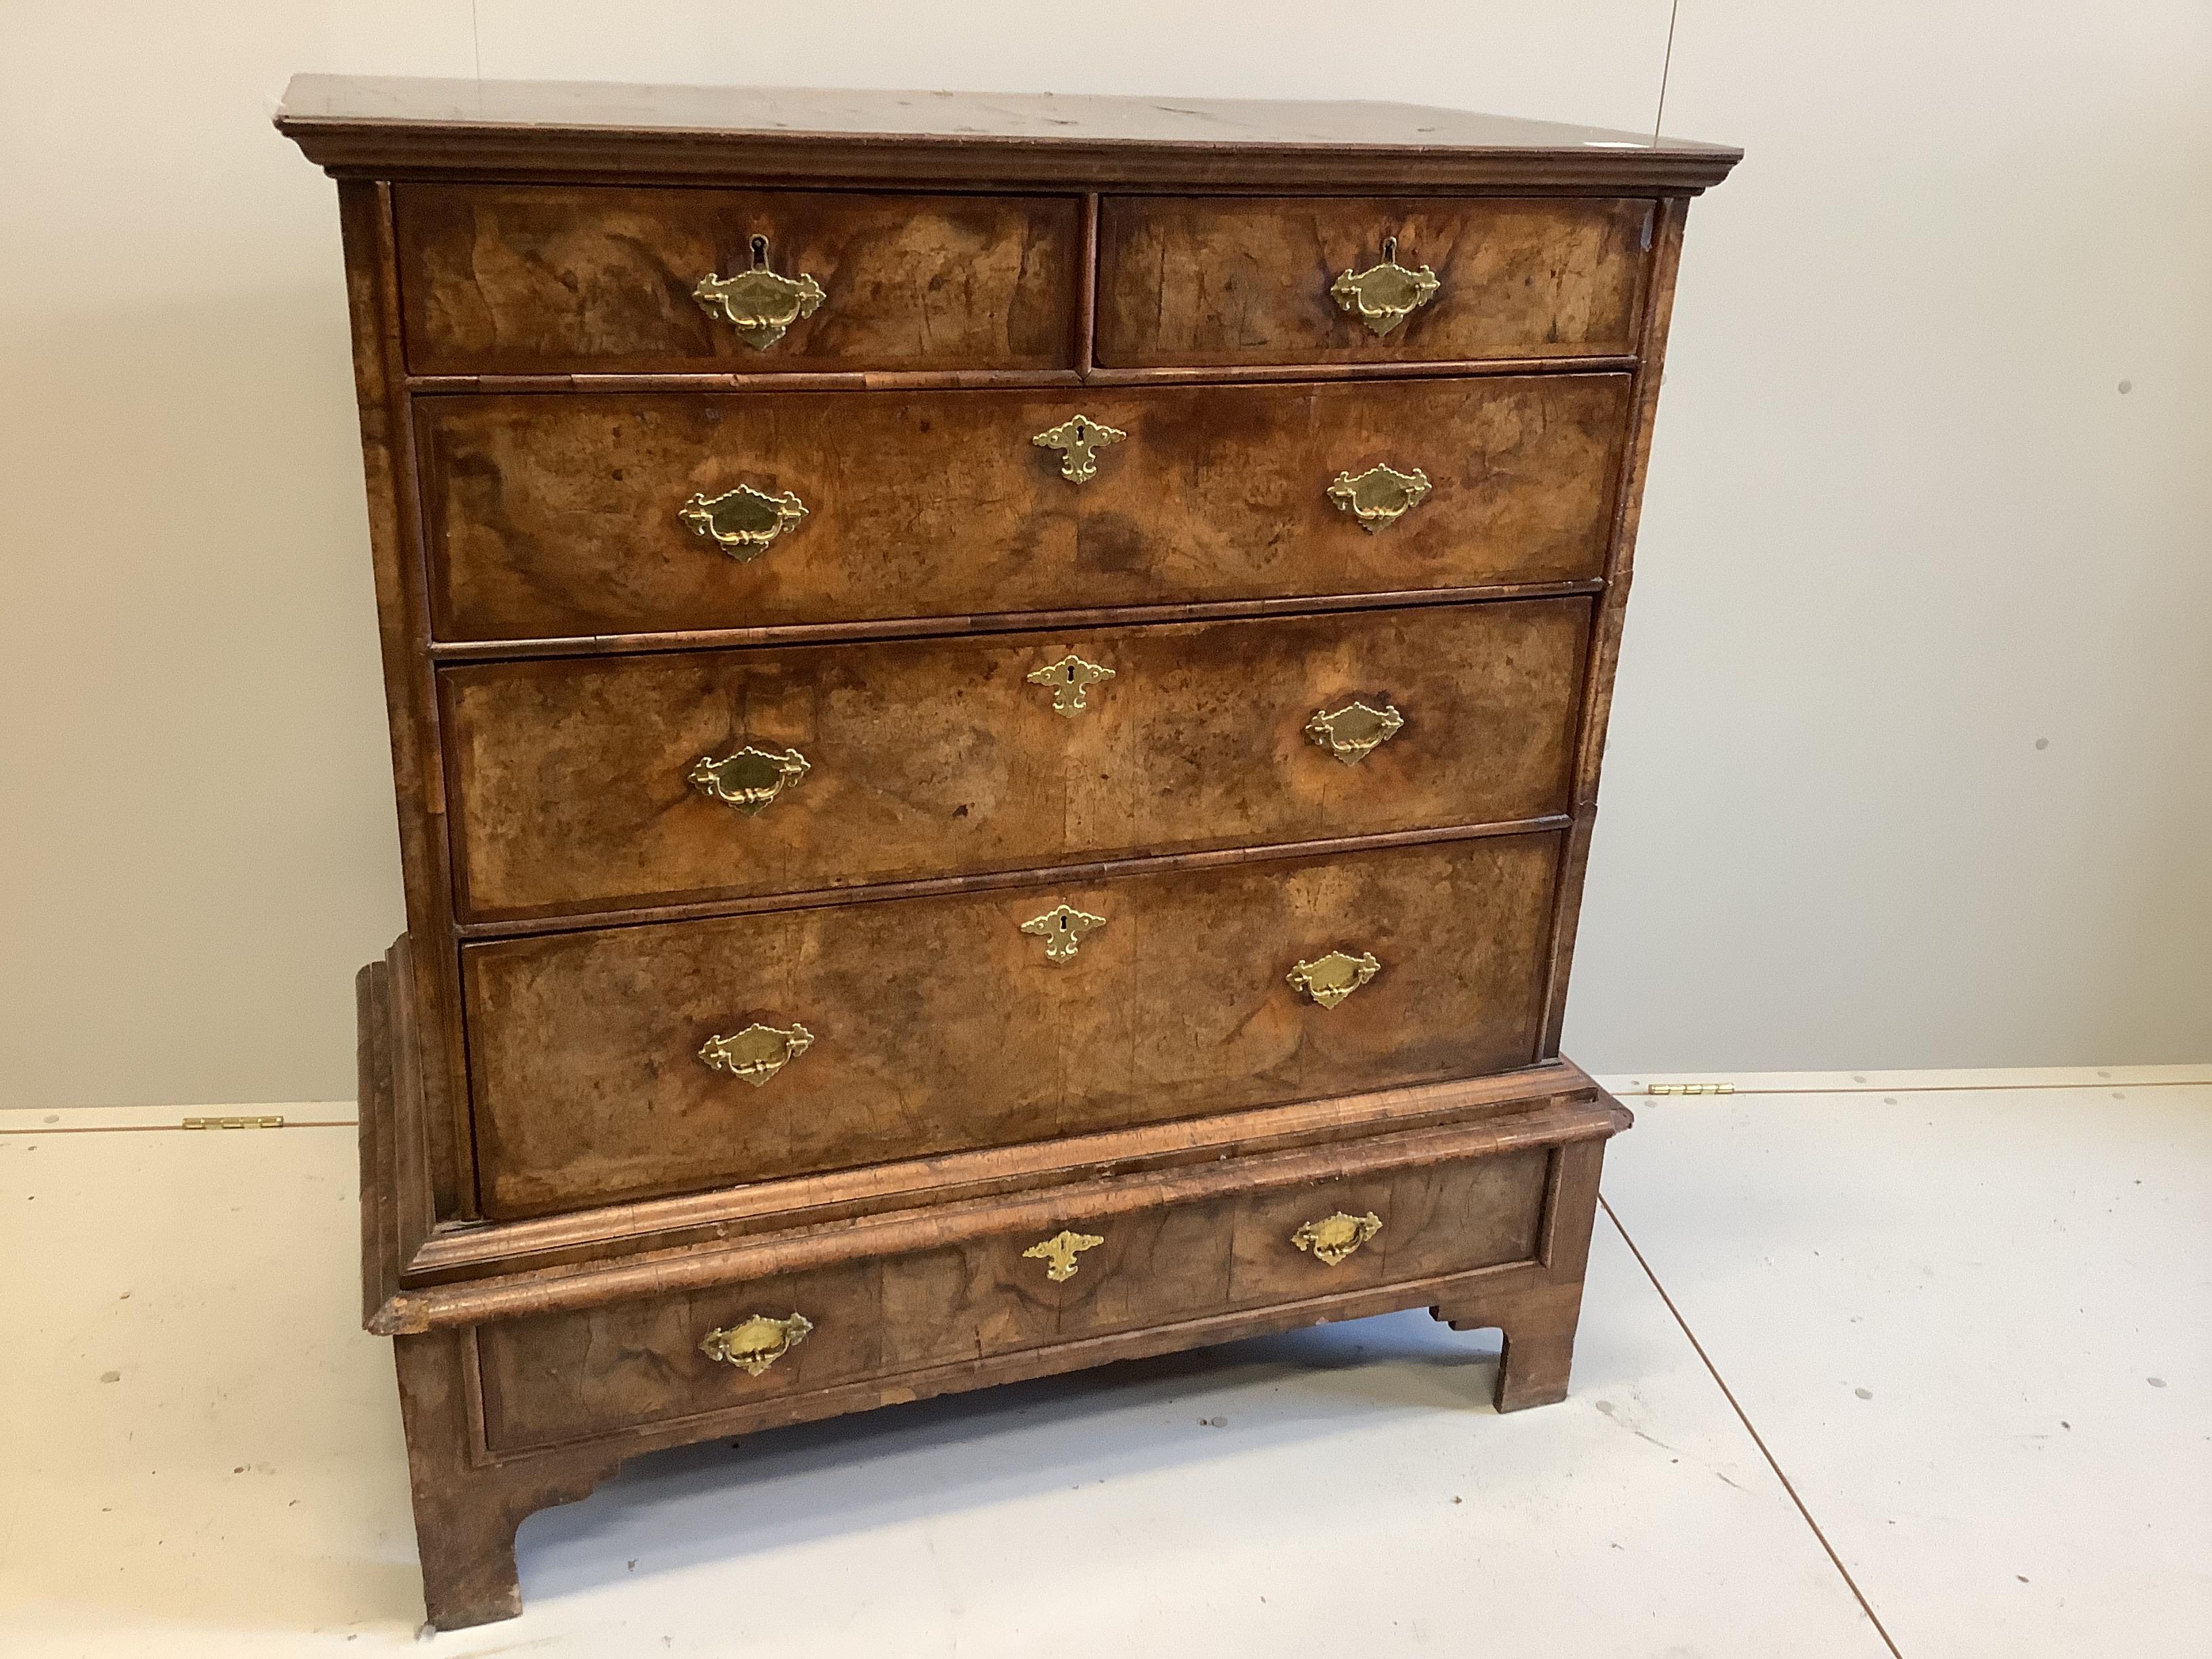 An 18th century feather banded walnut chest on stand, width 105cm, depth 58cm, height 117cm